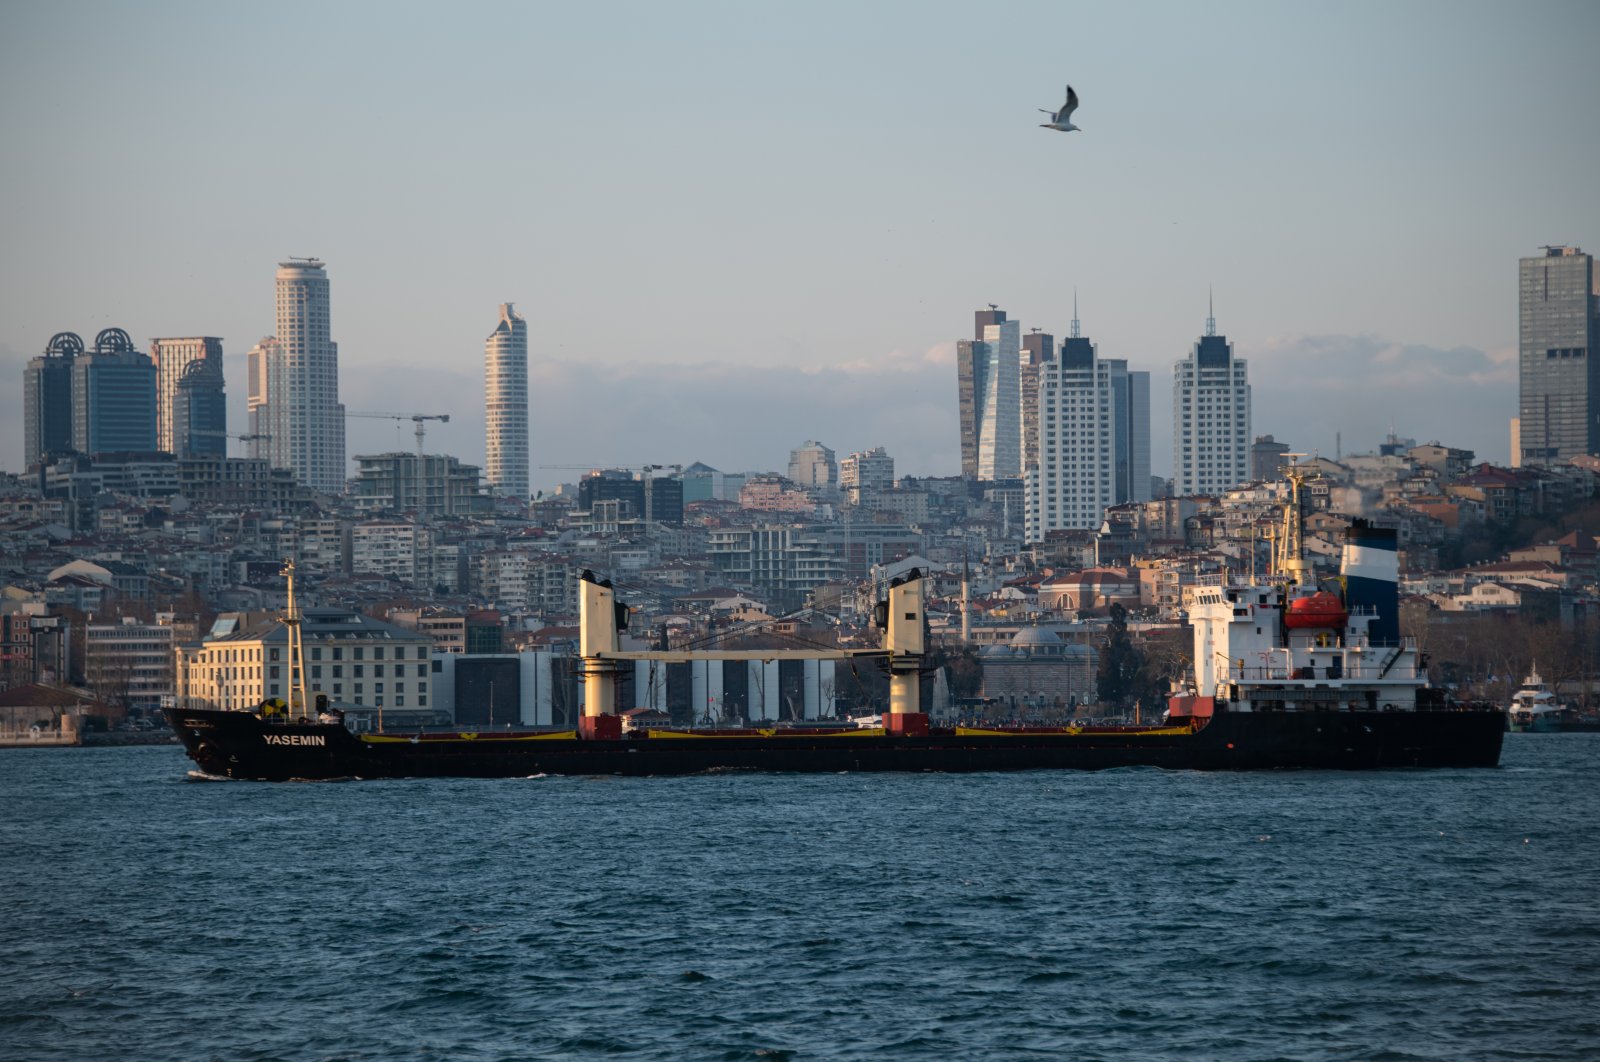 A cargo ship passes through the Bosporus with skyscrapers in the background in Istanbul, Türkiye, Jan. 15, 2023. (Reuters Photo)